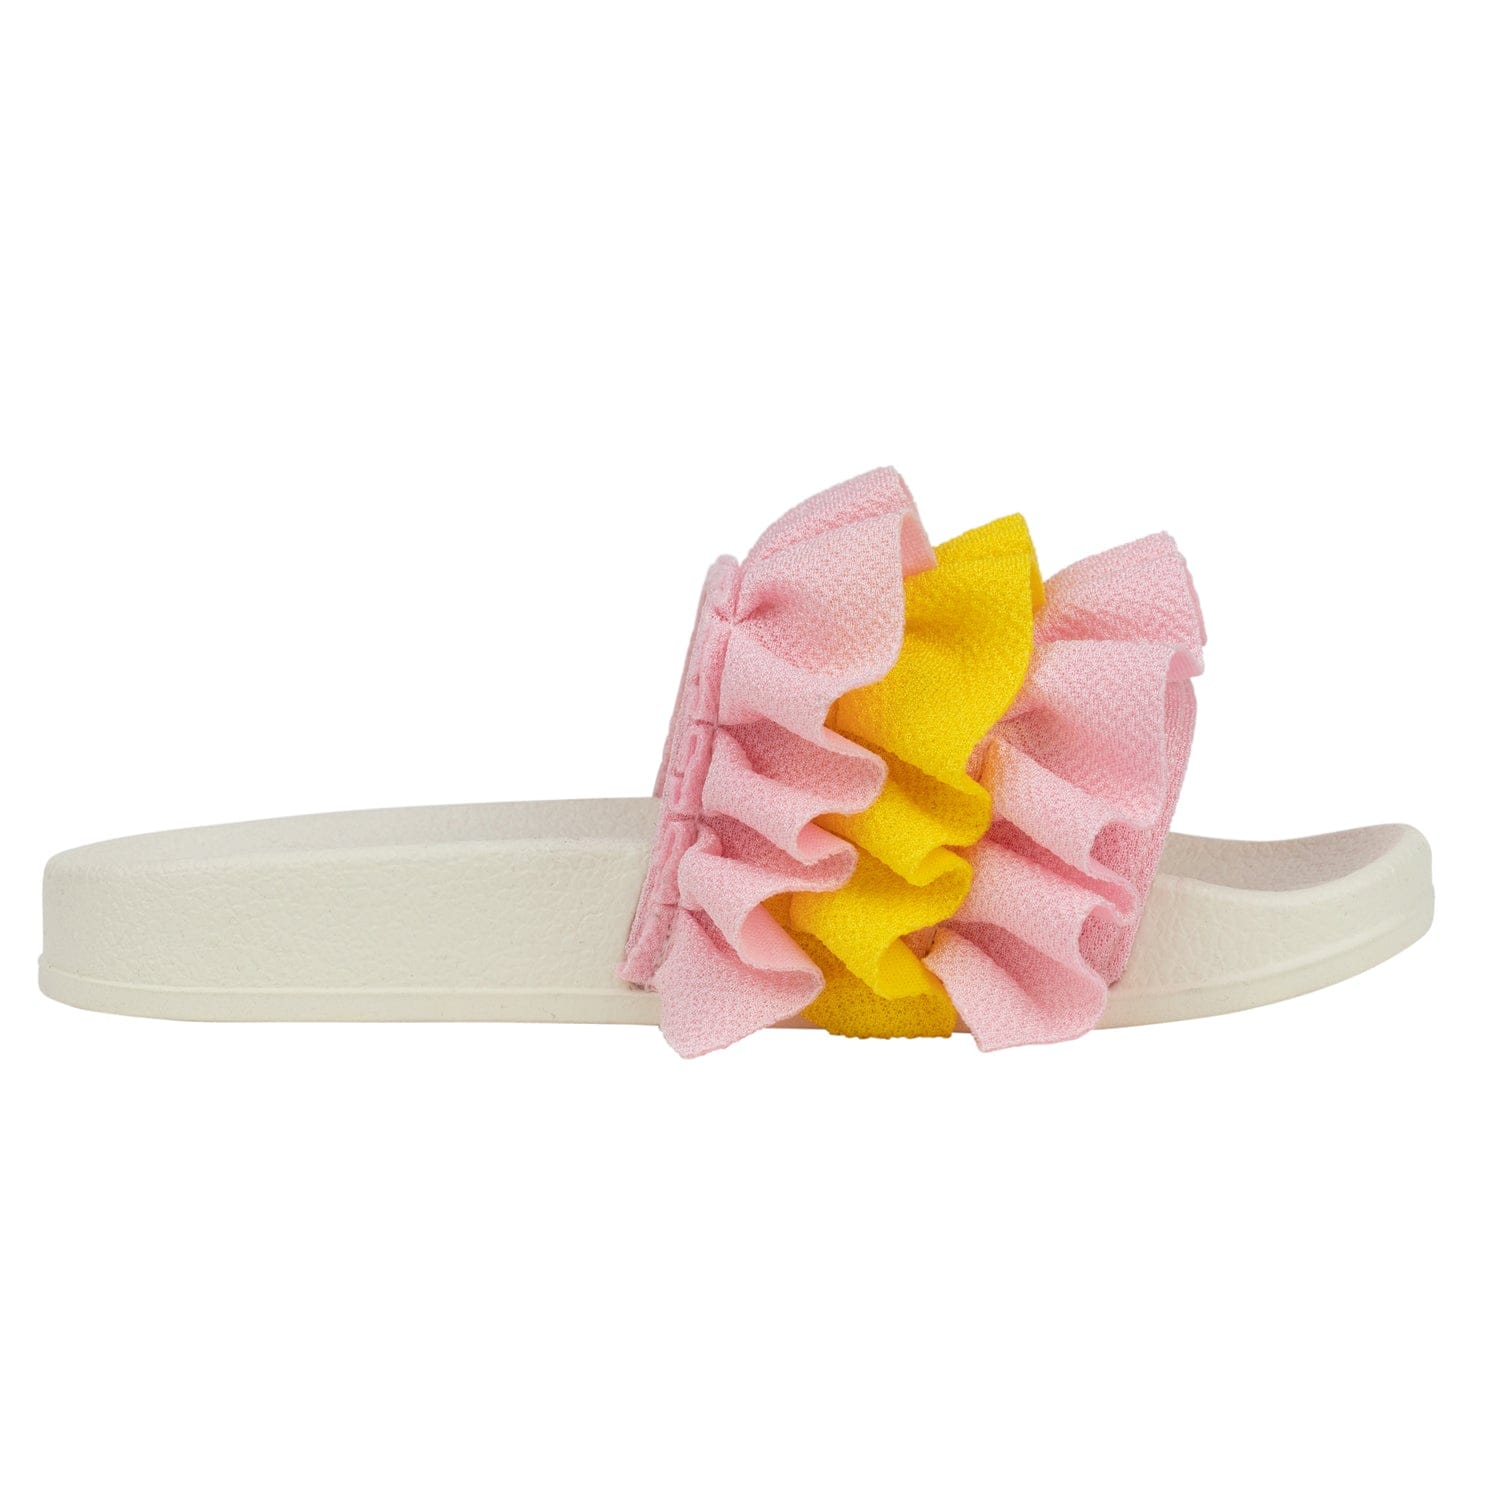 A DEE - Frilly Chic Chevron Frill Sliders - Pink